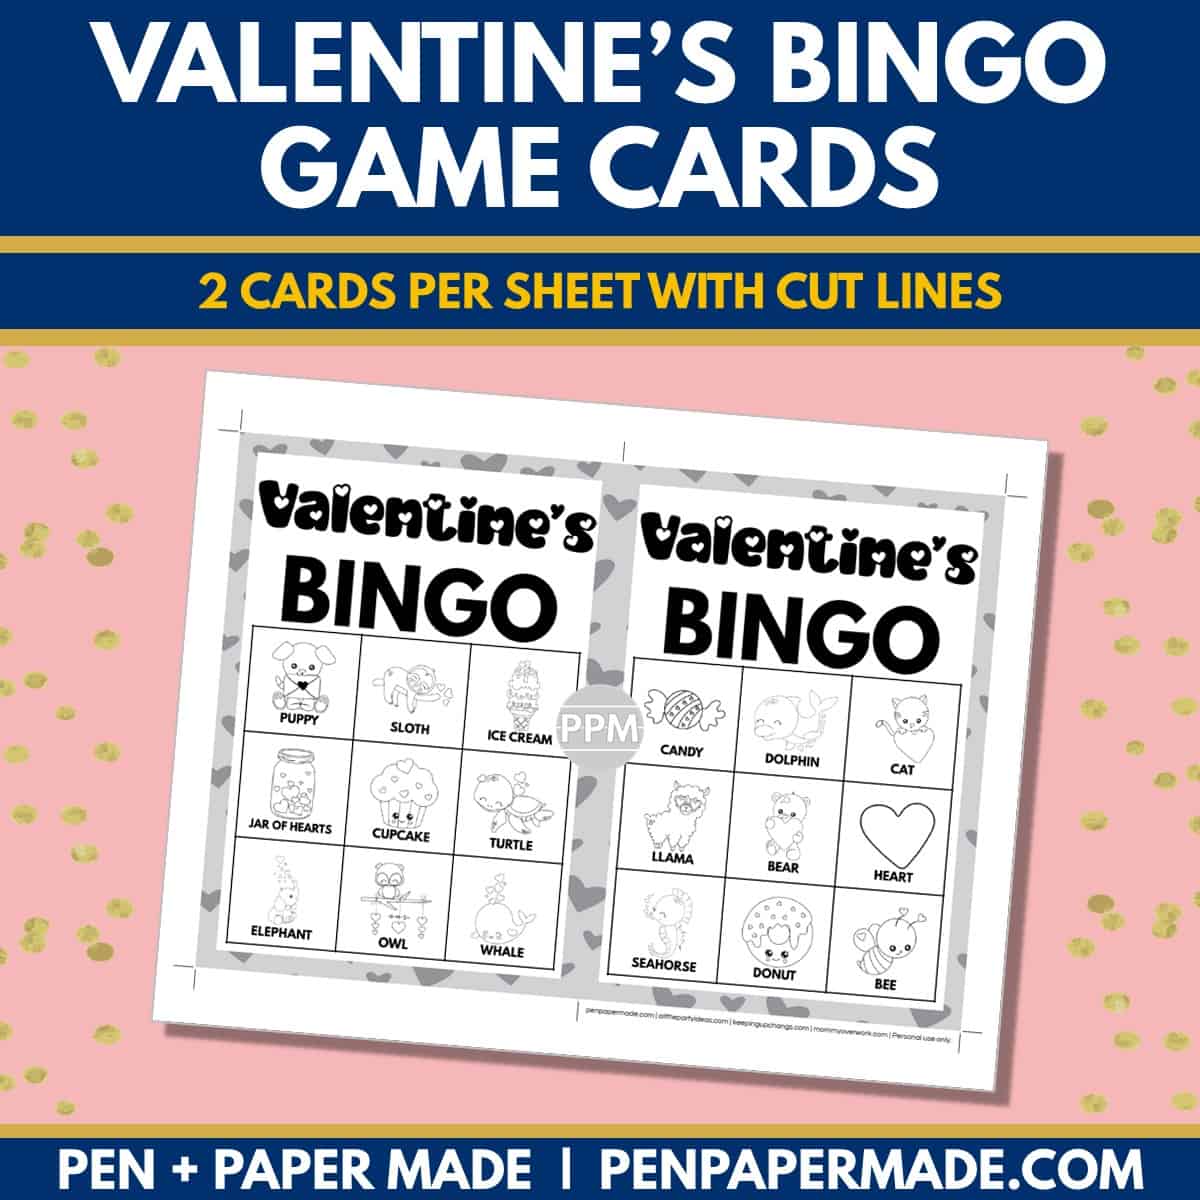 valentine's day bingo card 3x3 5x7 game boards with images and text words.